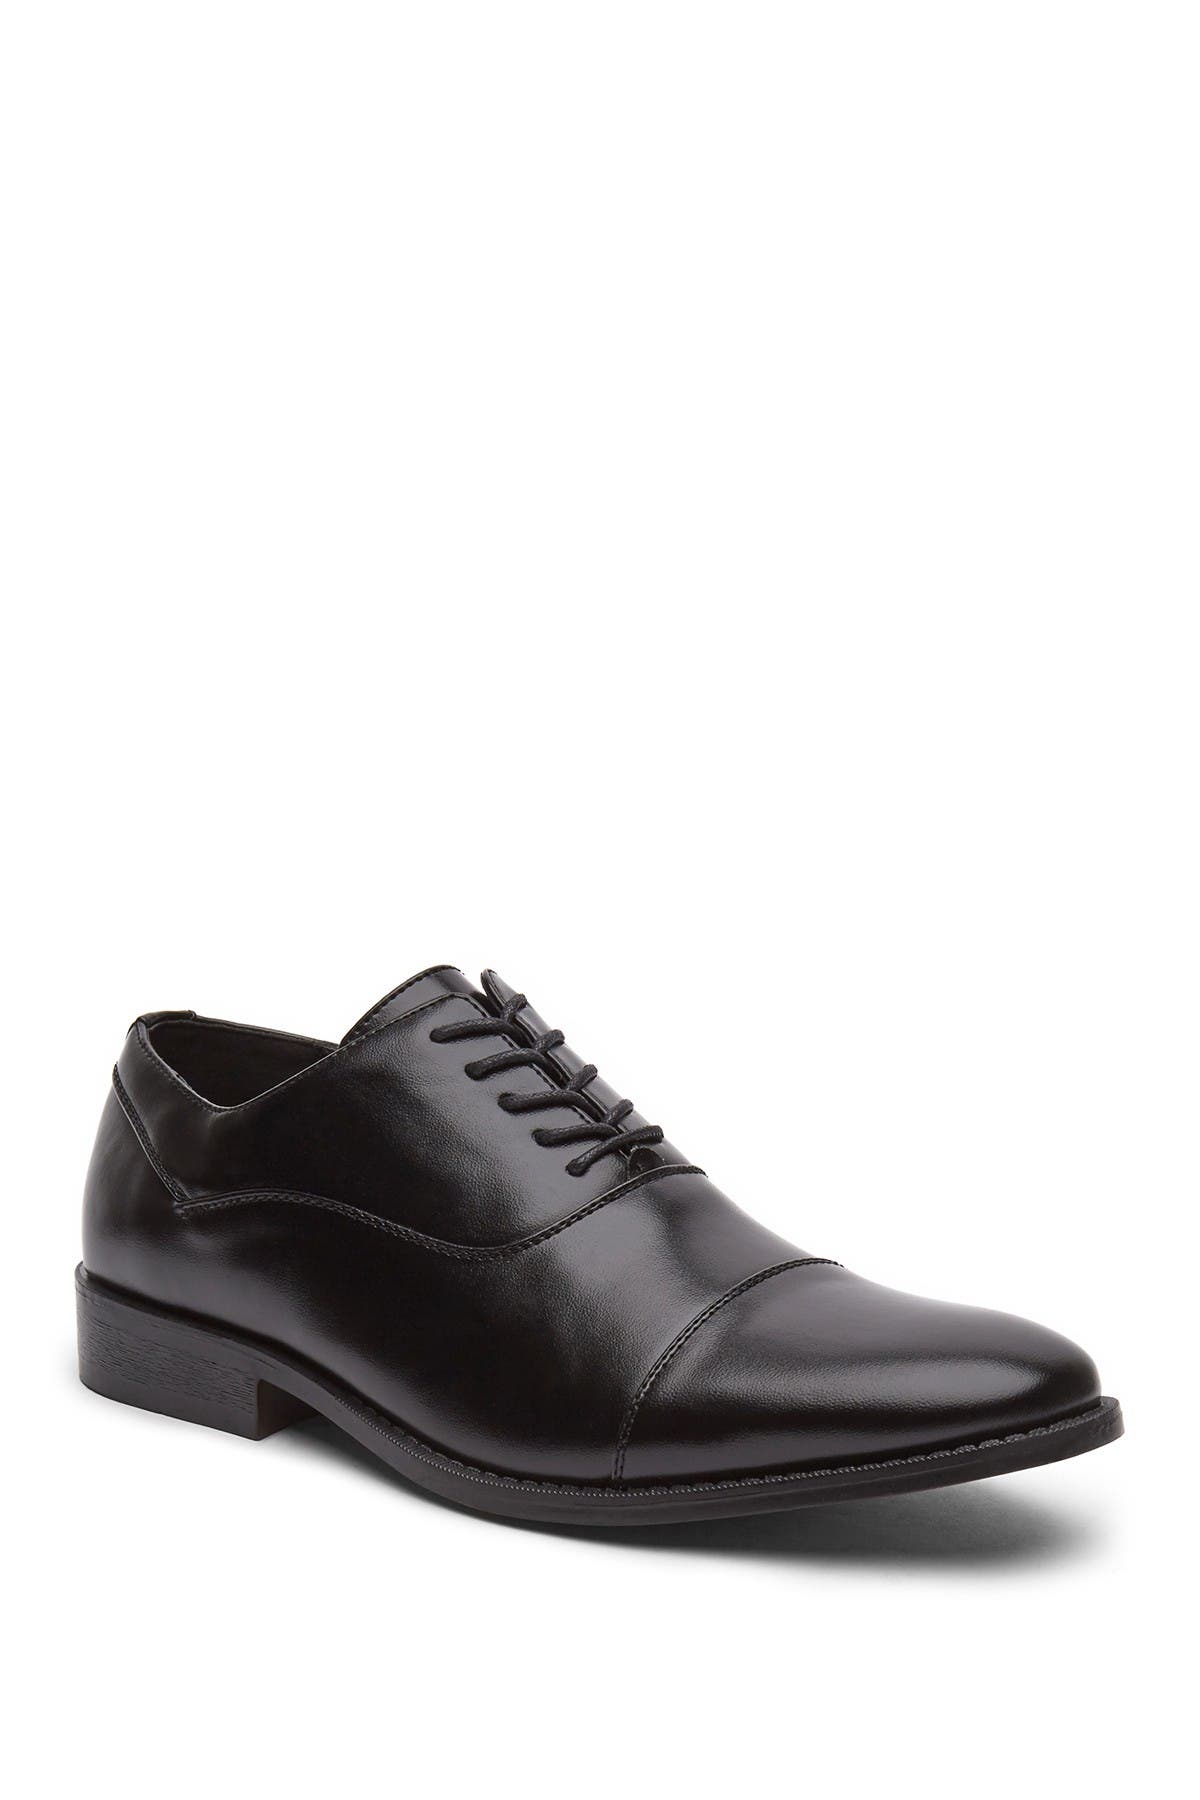 kenneth cole unlisted half time men's cap toe oxford